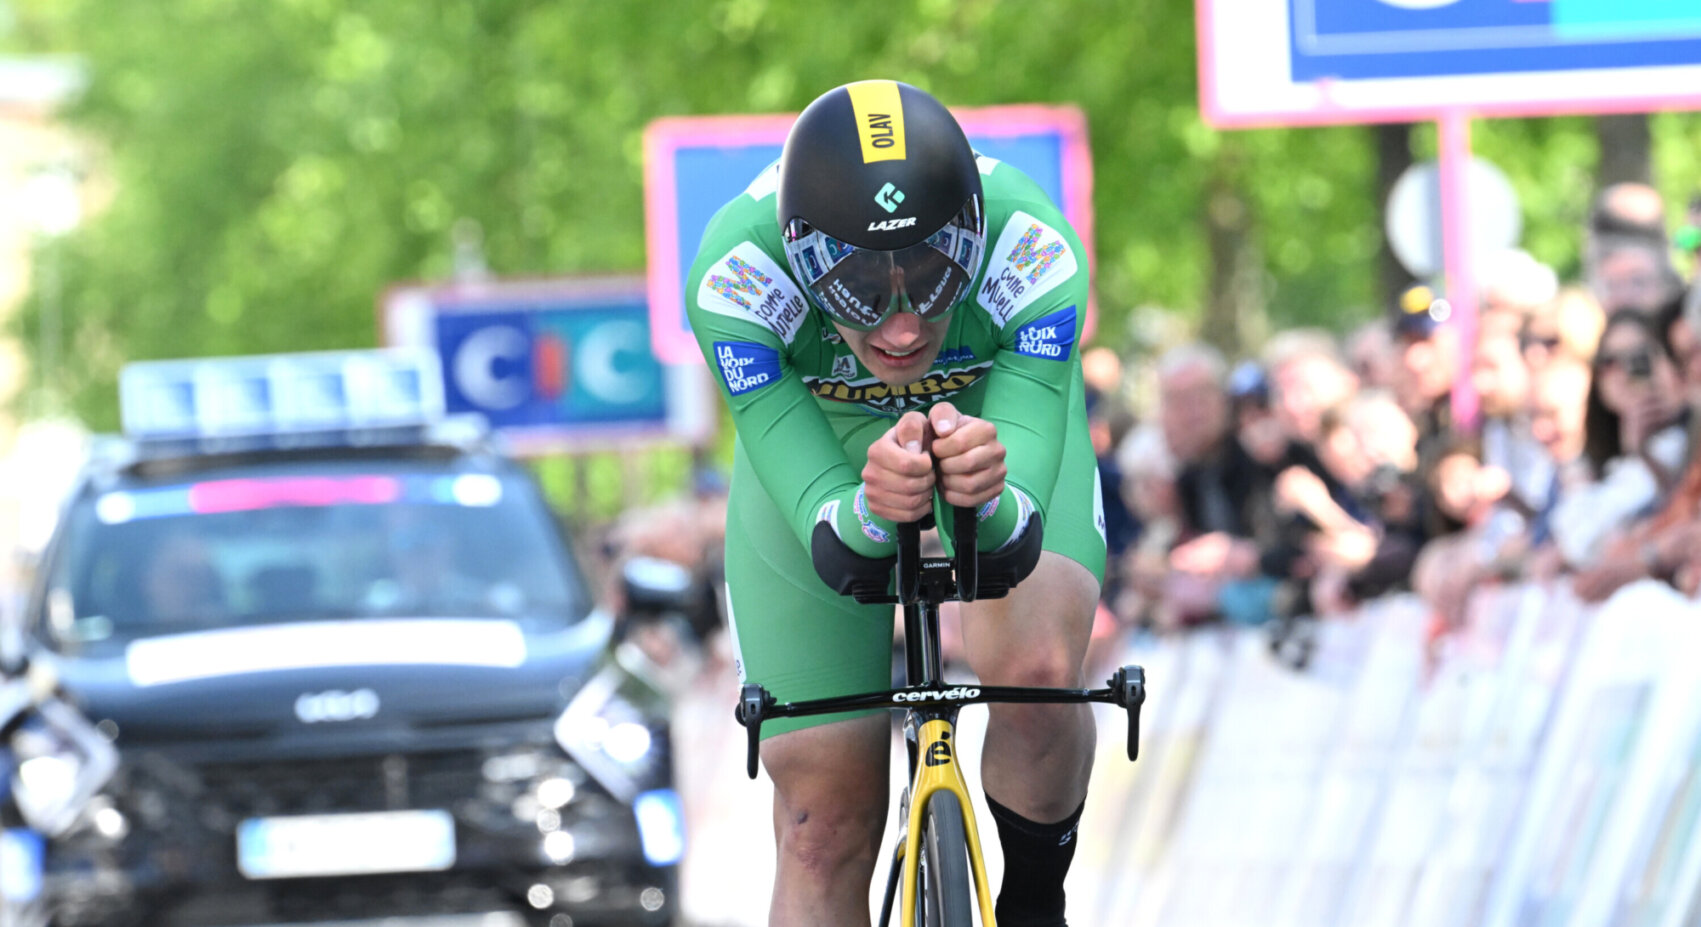 Van Dijke eighth in Four Days of Dunkirk time trial as Kooij limits damage	